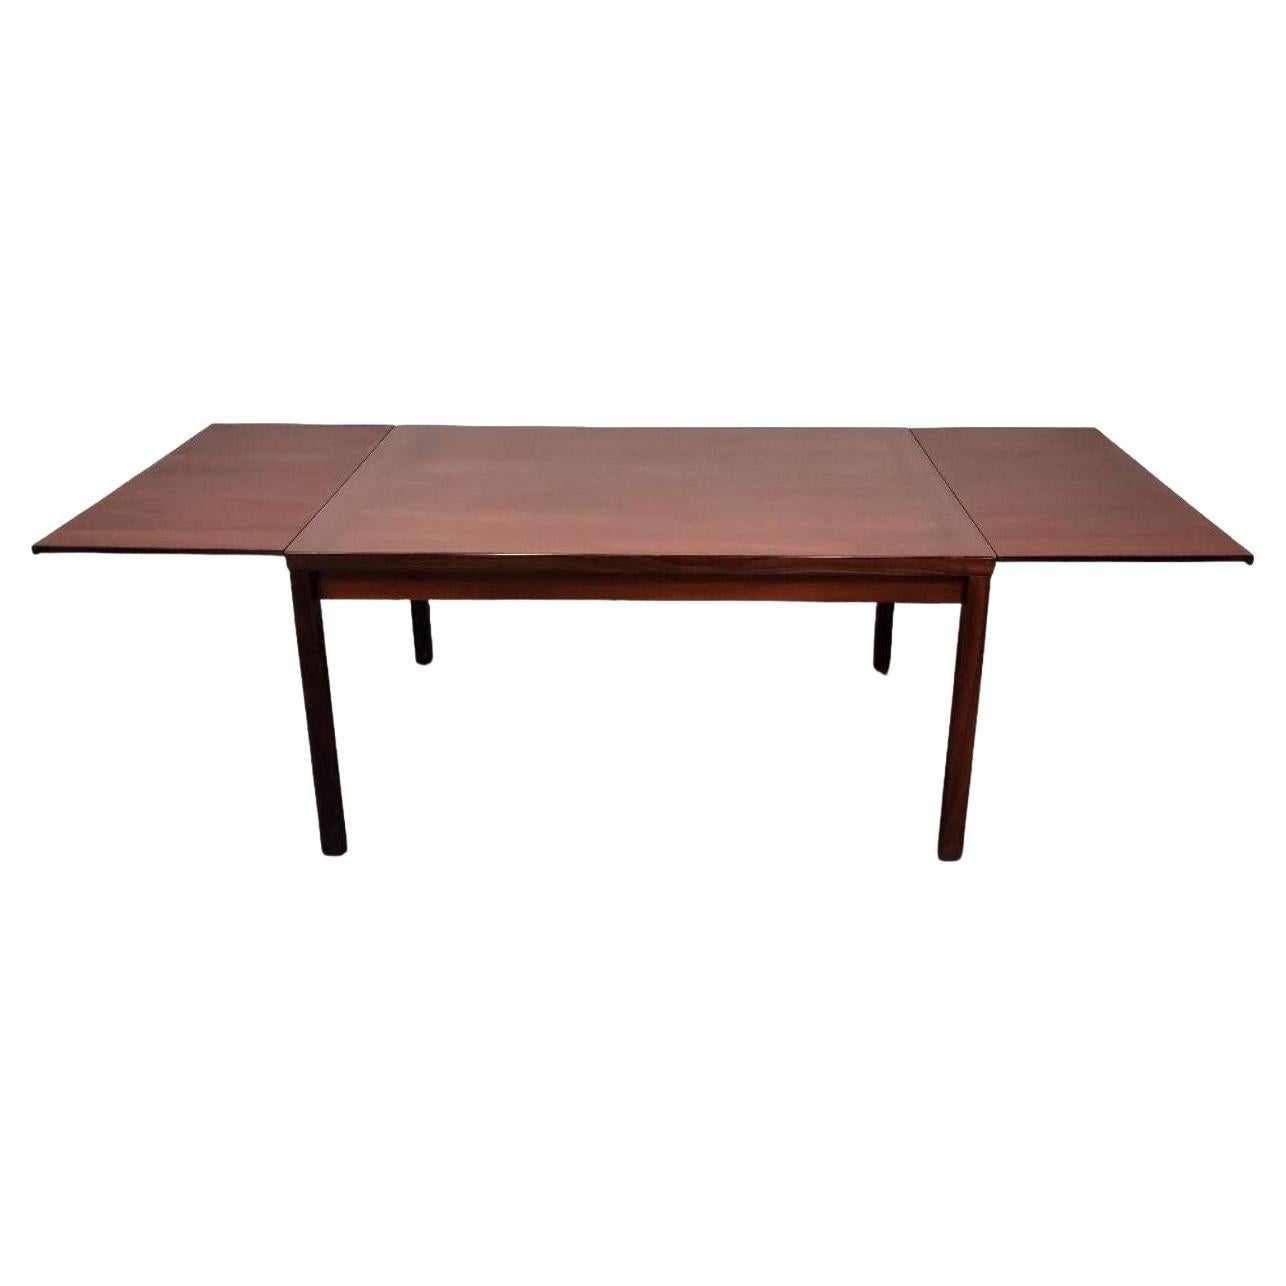 Vintage 1960s Danish Modern Rosewood Extendable Dining Table Made In Denmark